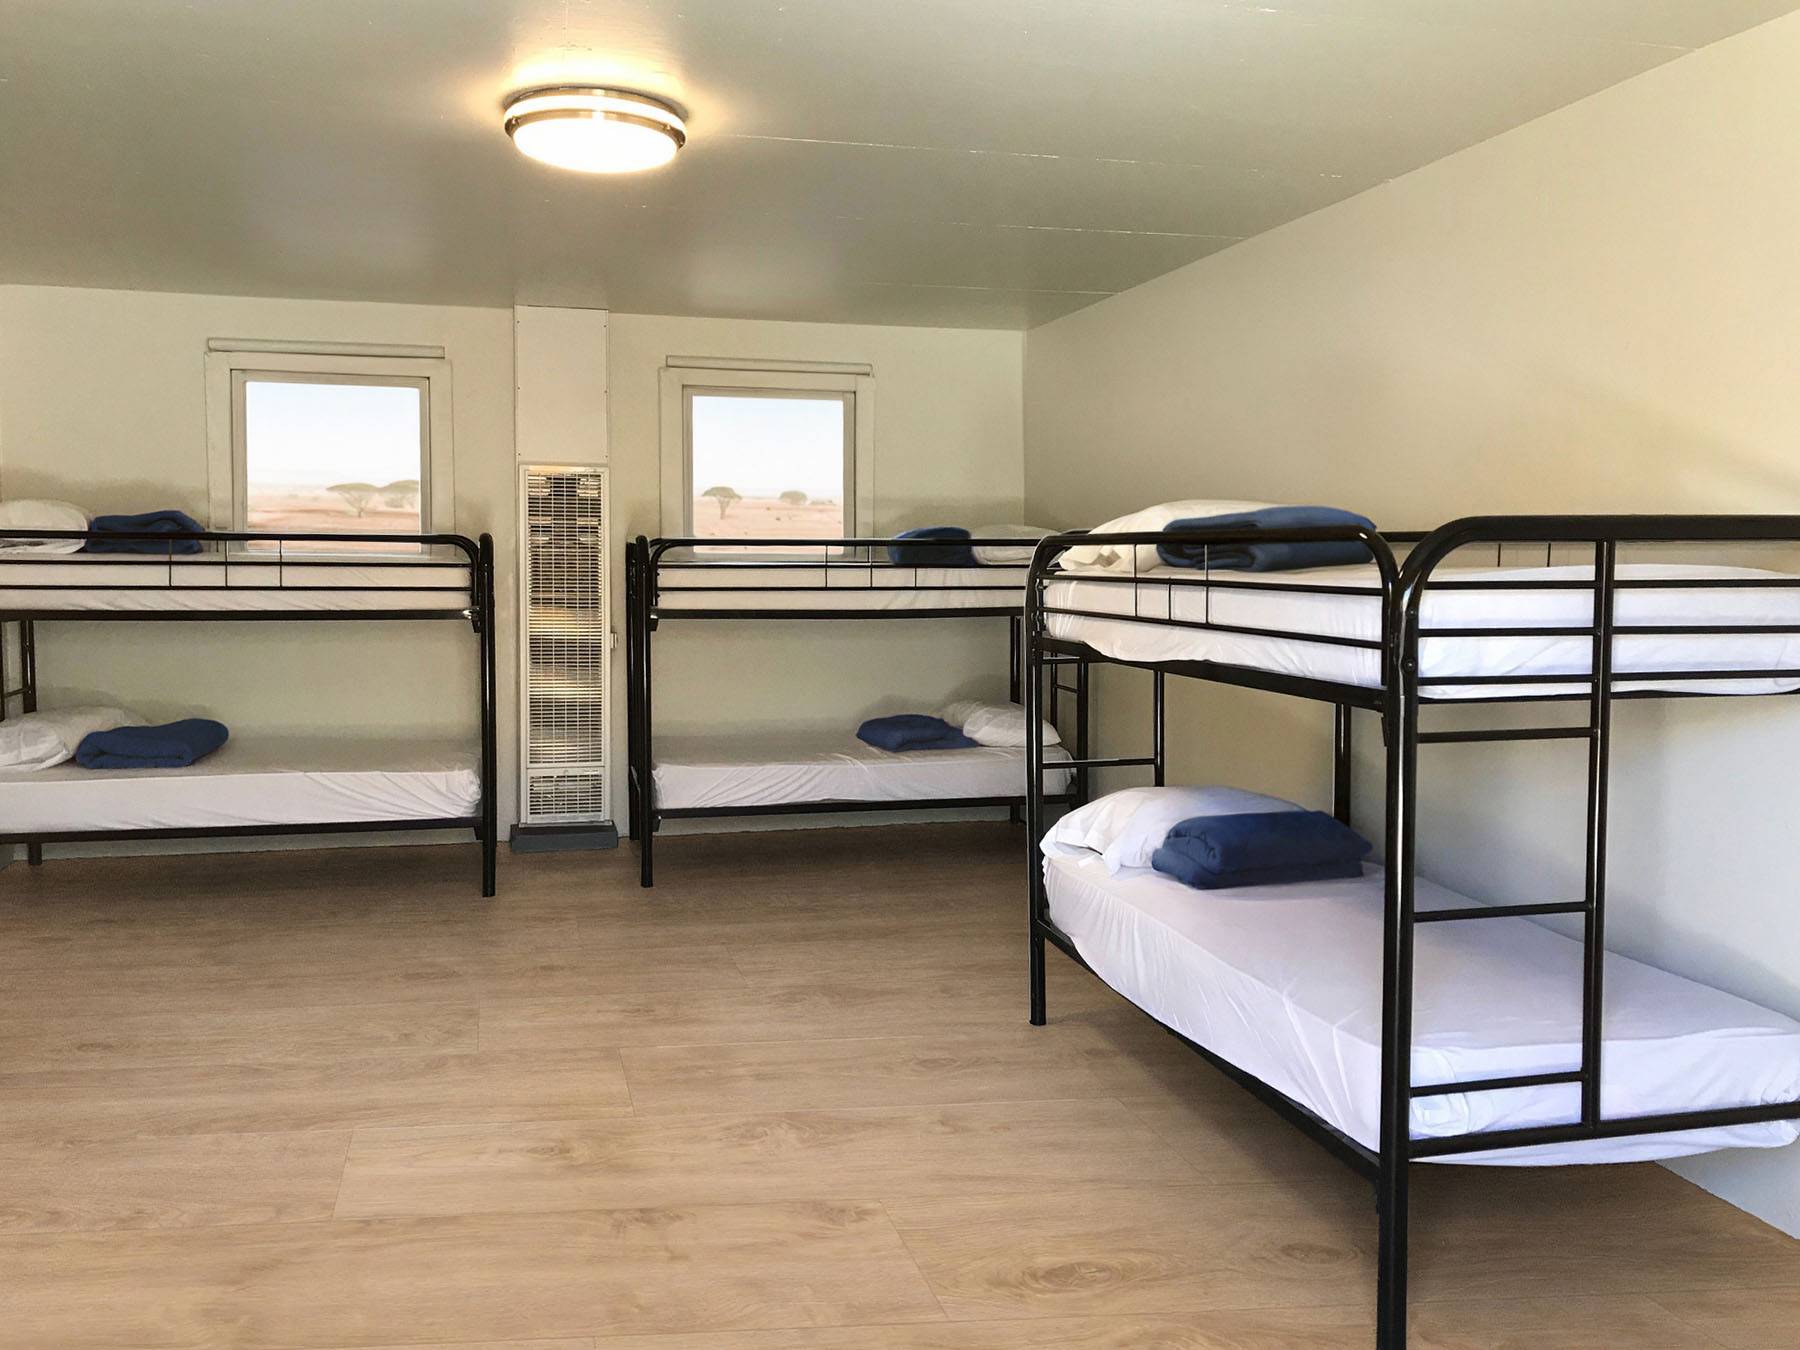 Bunk beds in a shared worker dormitory with windows looking onto a savannah.